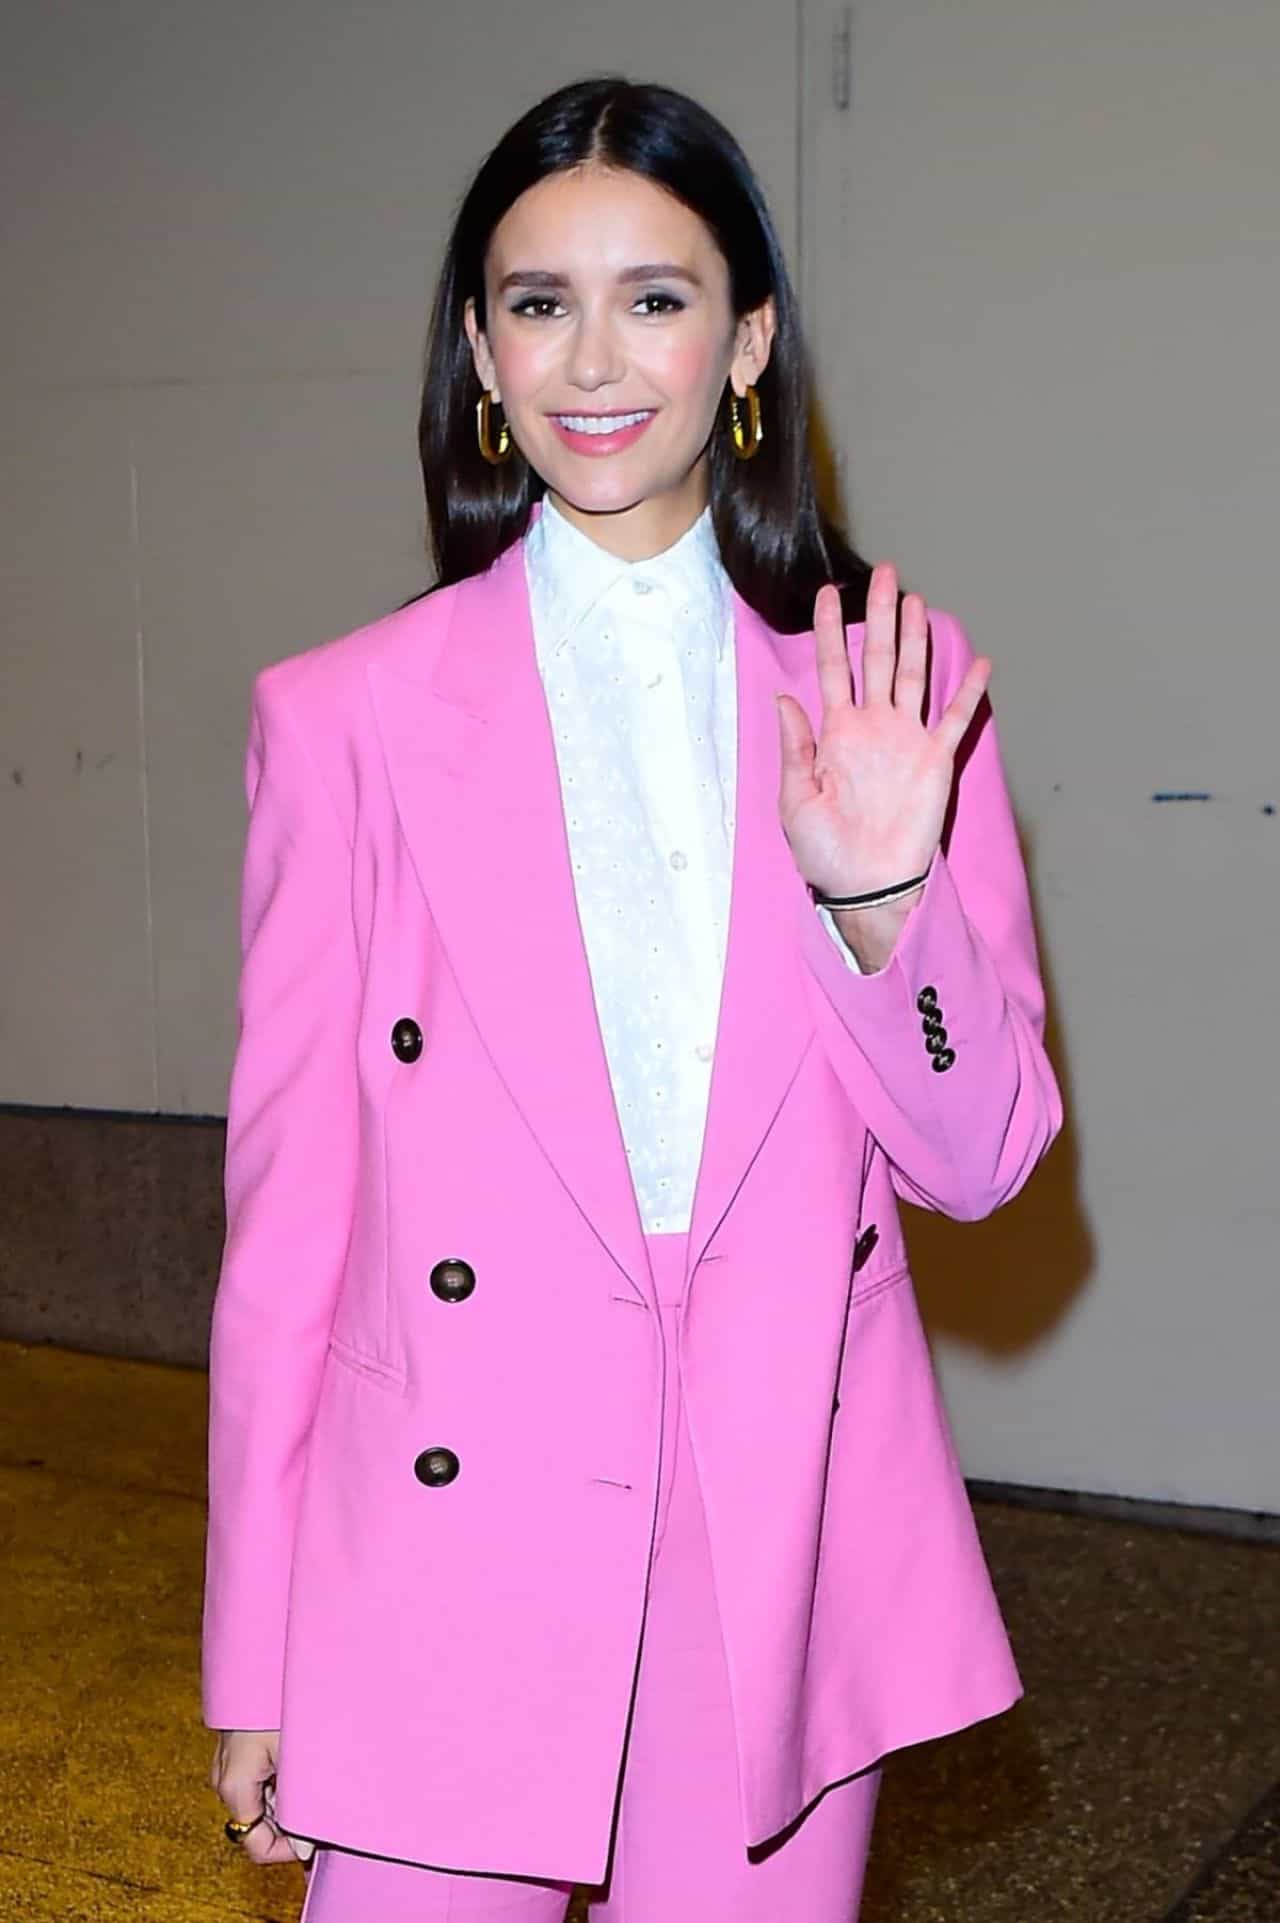 Nina Dobrev Rocks a Stylish Pink Suit for "The Out-Laws" Promotion